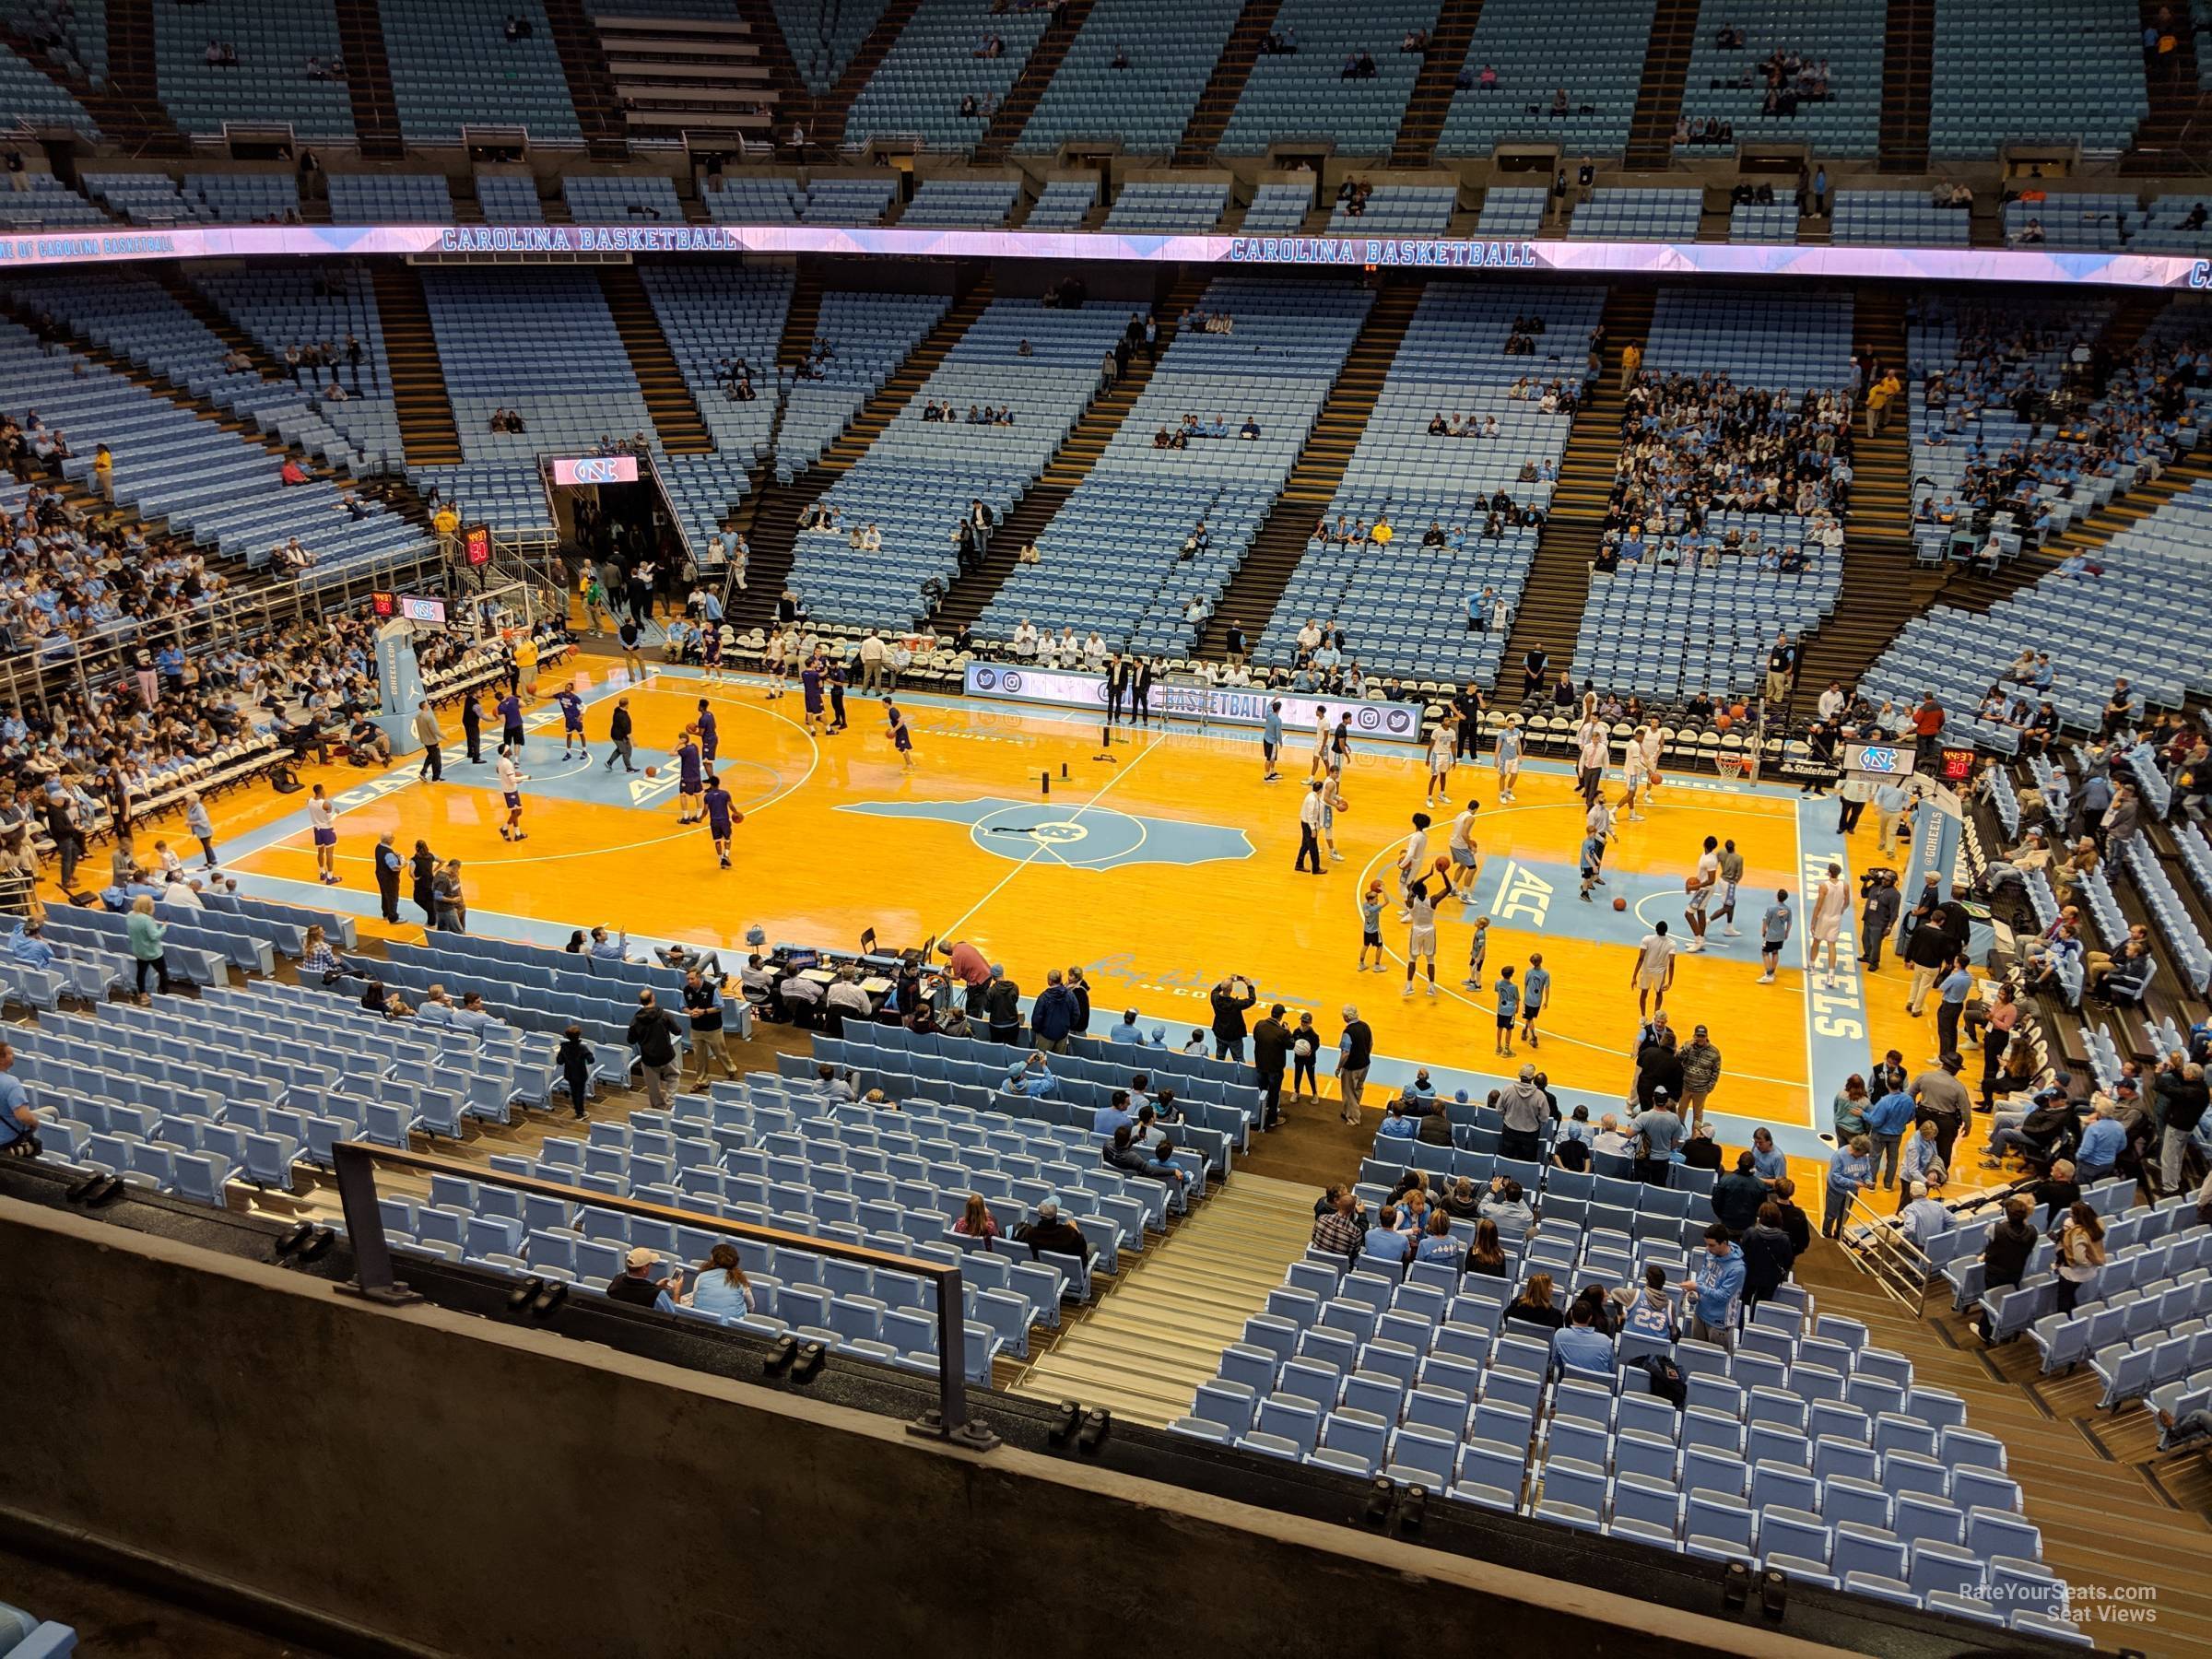 section 227, row c seat view  - dean smith center